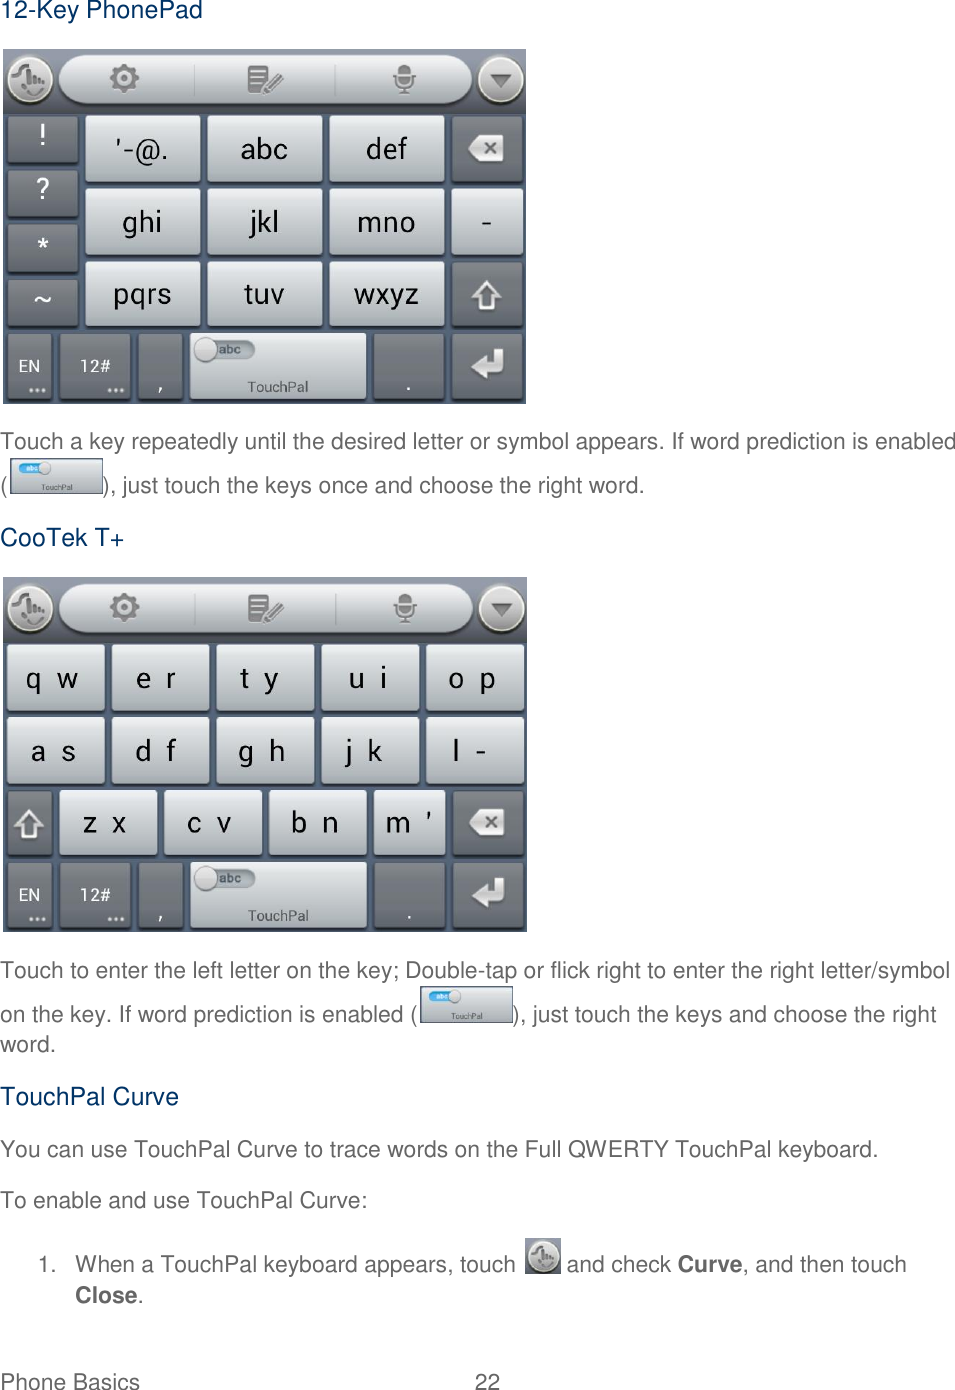 Phone Basics  22   12-Key PhonePad  Touch a key repeatedly until the desired letter or symbol appears. If word prediction is enabled ( ), just touch the keys once and choose the right word. CooTek T+  Touch to enter the left letter on the key; Double-tap or flick right to enter the right letter/symbol on the key. If word prediction is enabled ( ), just touch the keys and choose the right word. TouchPal Curve You can use TouchPal Curve to trace words on the Full QWERTY TouchPal keyboard. To enable and use TouchPal Curve: 1.  When a TouchPal keyboard appears, touch   and check Curve, and then touch Close. 